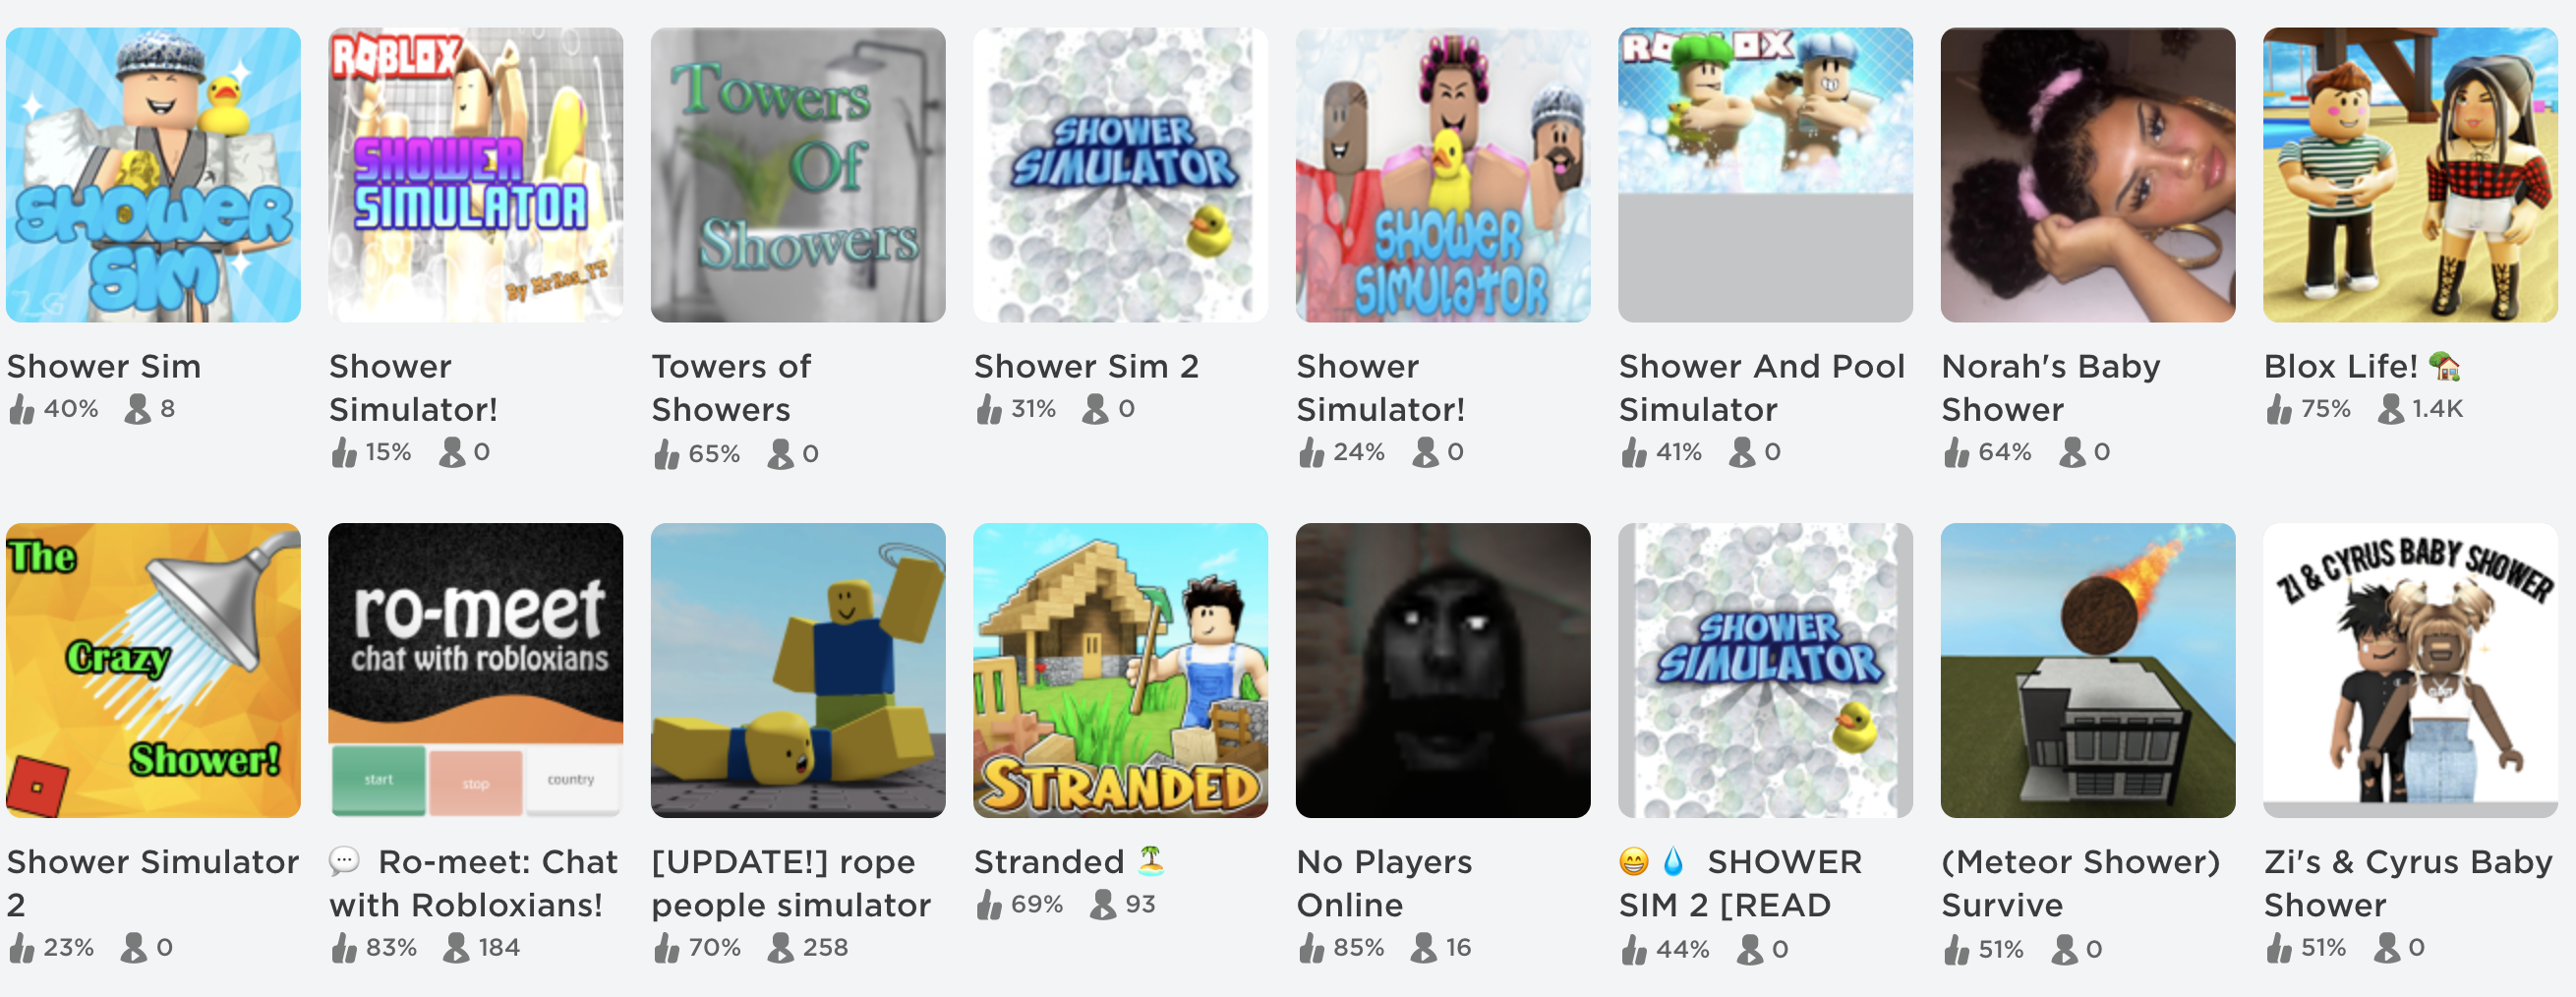 Roblox To Develop Improved Parental Controls As It Struggles With Sexually Explicit Content - how to buy roblox gift card in malaysia